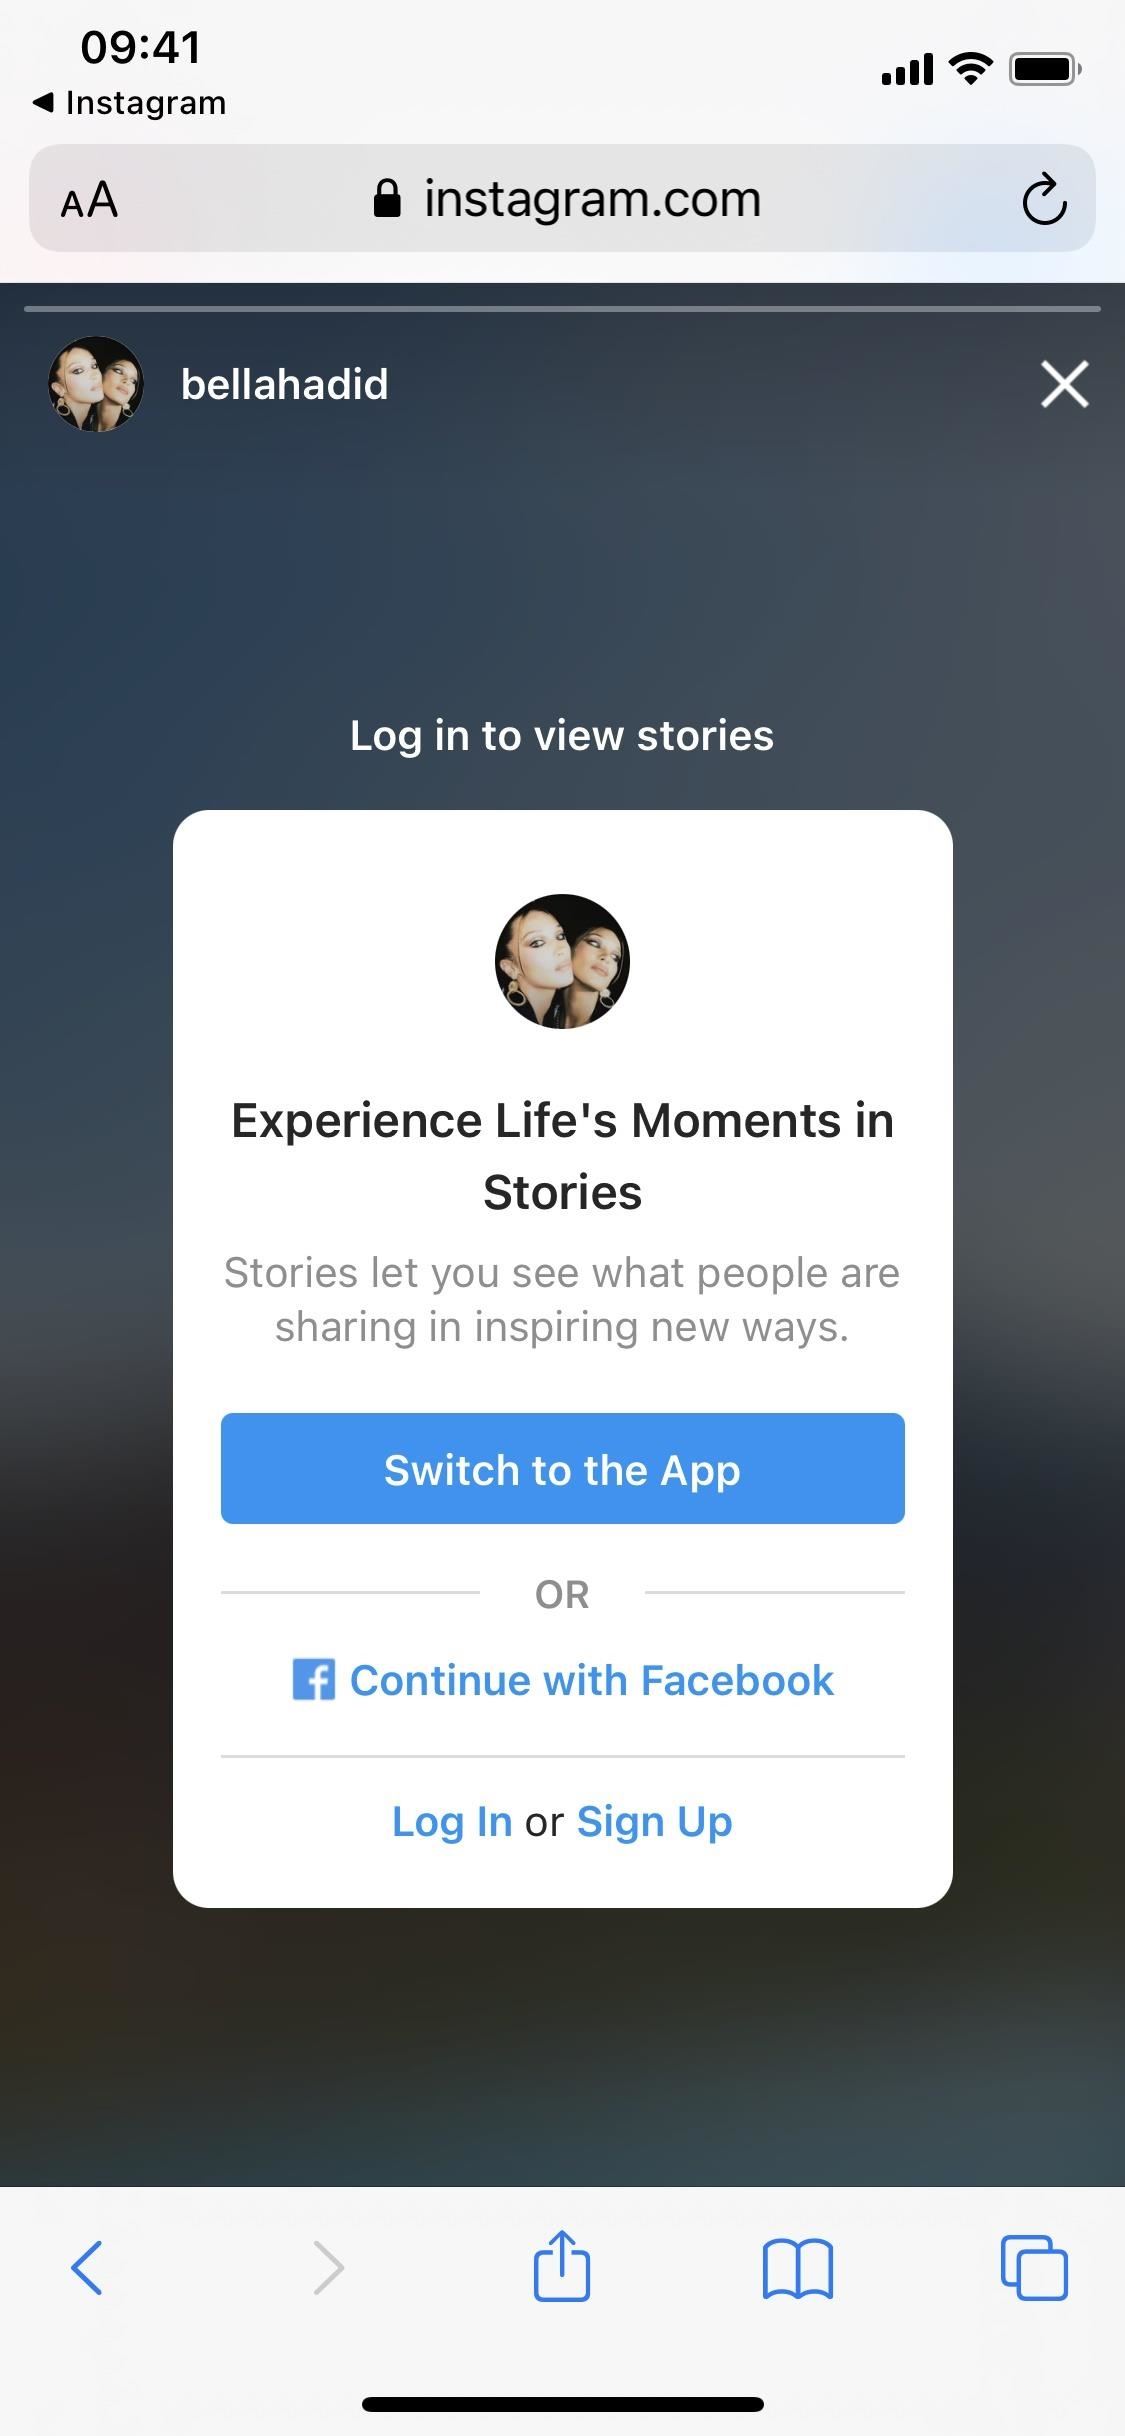 Download Photos and Videos from Instagram Posts and Stories Using This Shortcut for iPhone